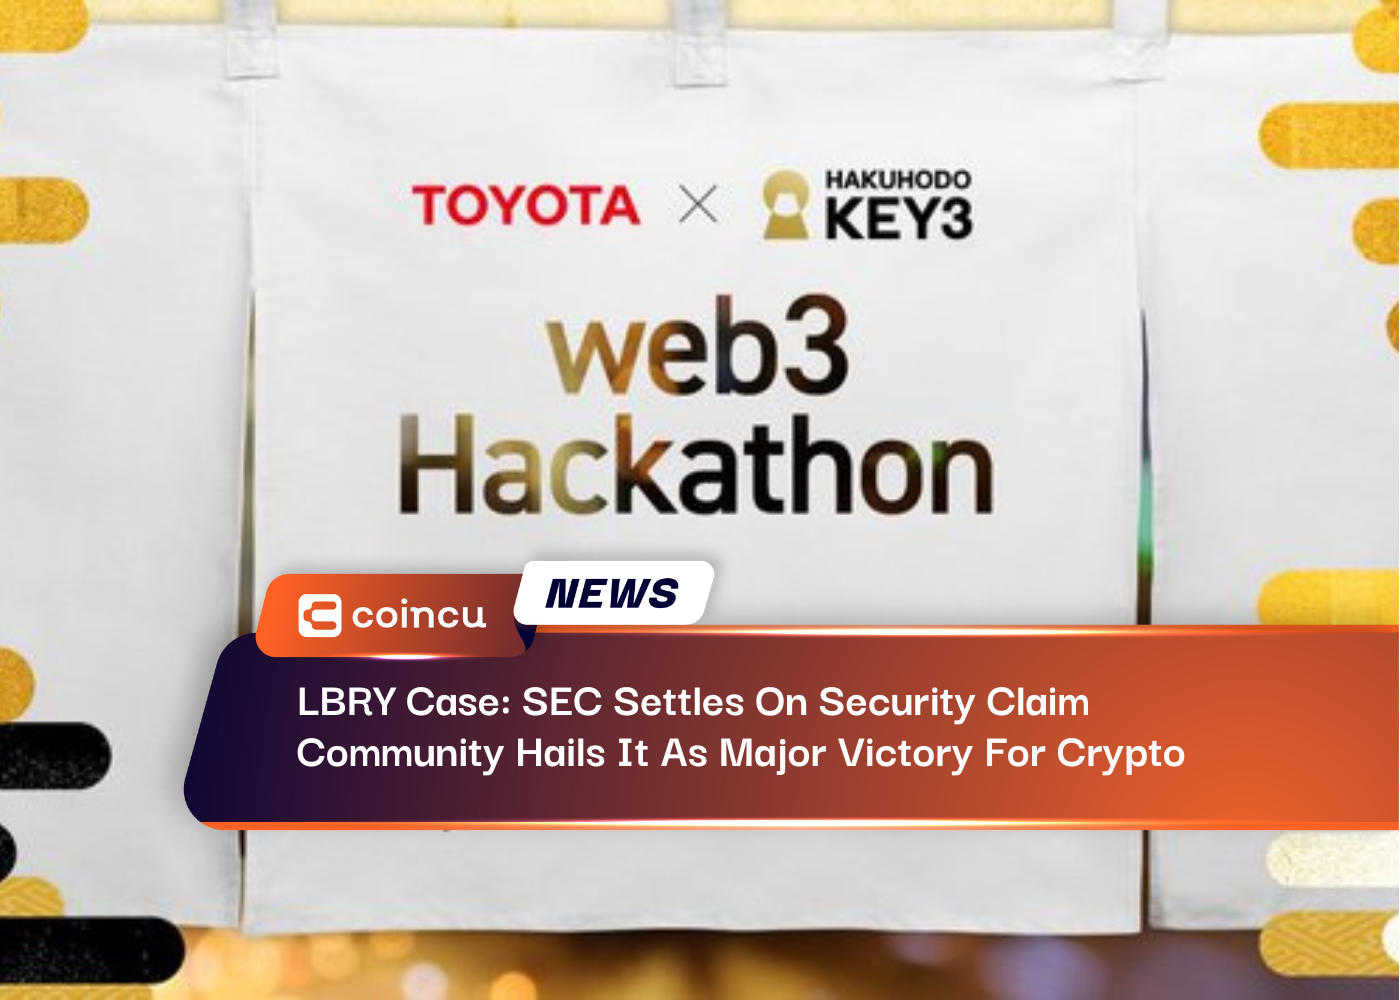 Toyota Will Use The DAO Hackathon To